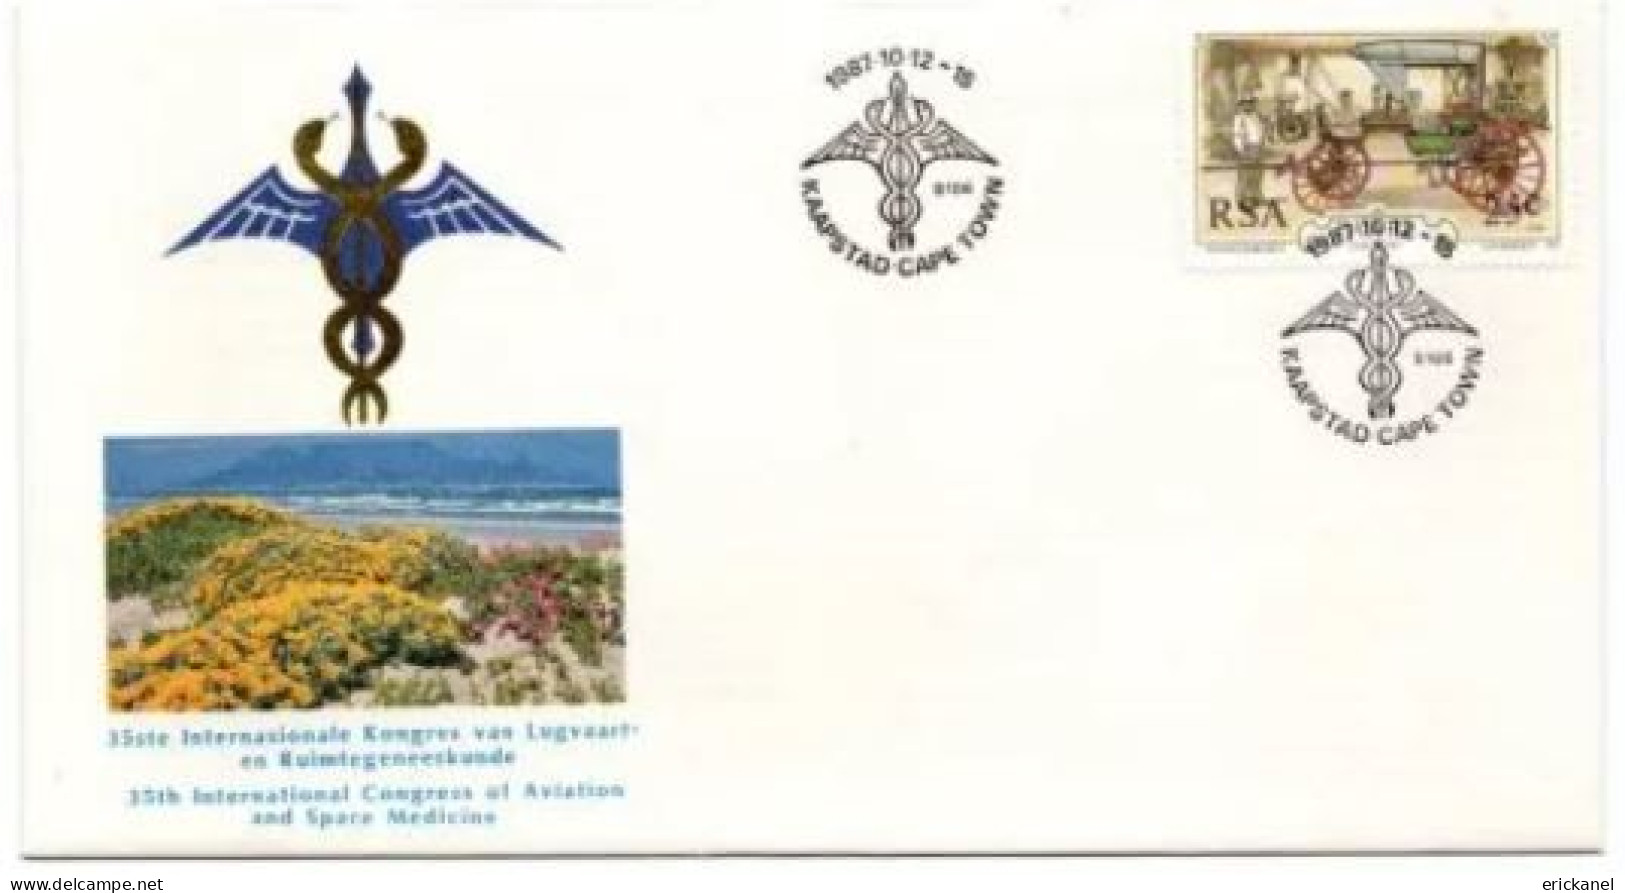 1987 SOUTH AFRICA 35th International Congress Of Aviation And Space Medicine Commemorative Cover - FDC